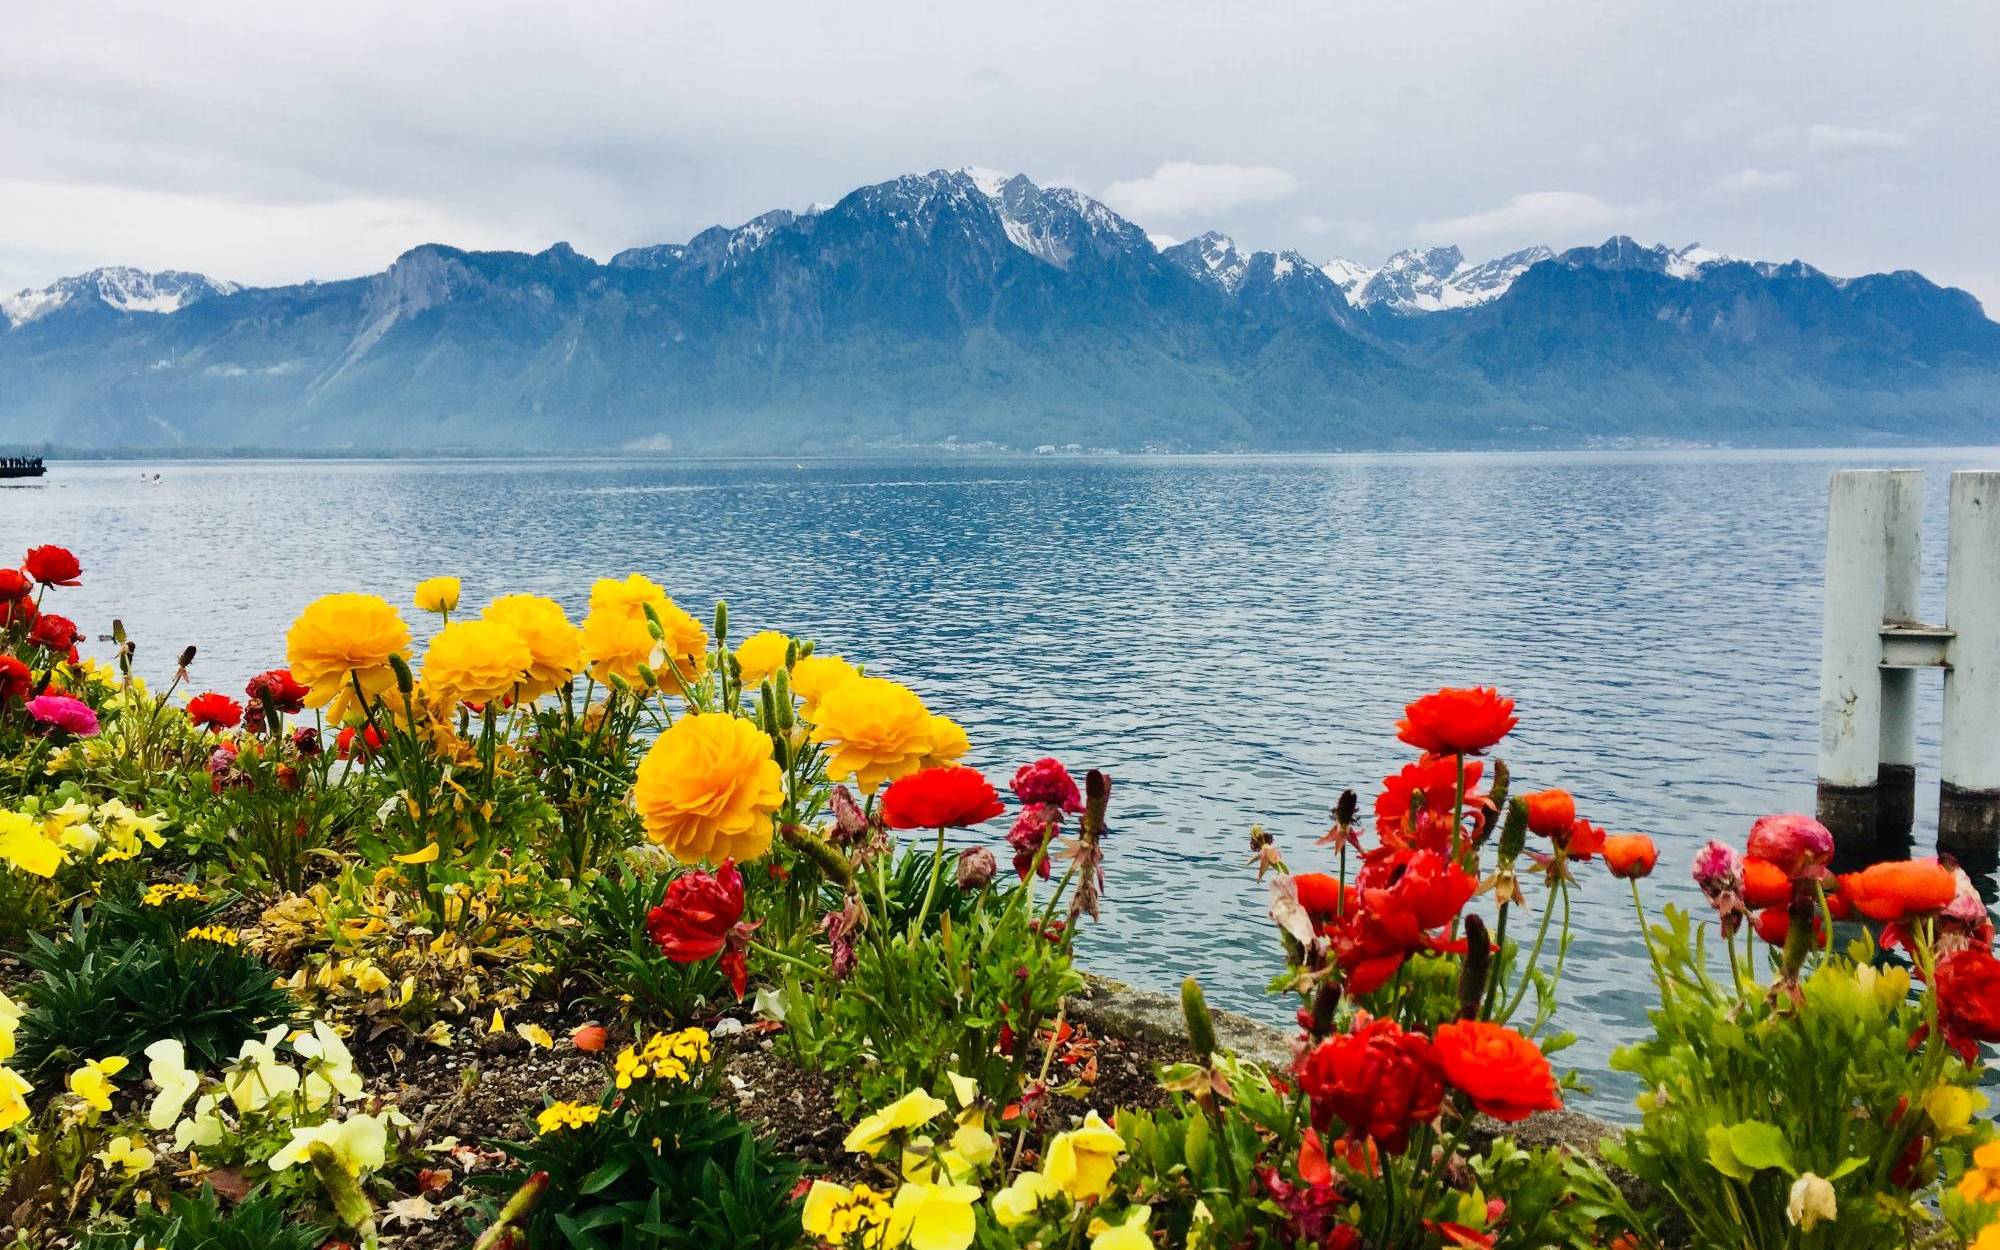 Category: Natural or Manmade Beauty - First Place / Category: Natural or Manmade Beauty - First Place "See the Touch of Winter's Snow in Montreux"
Rachel Schleier
Switzerland